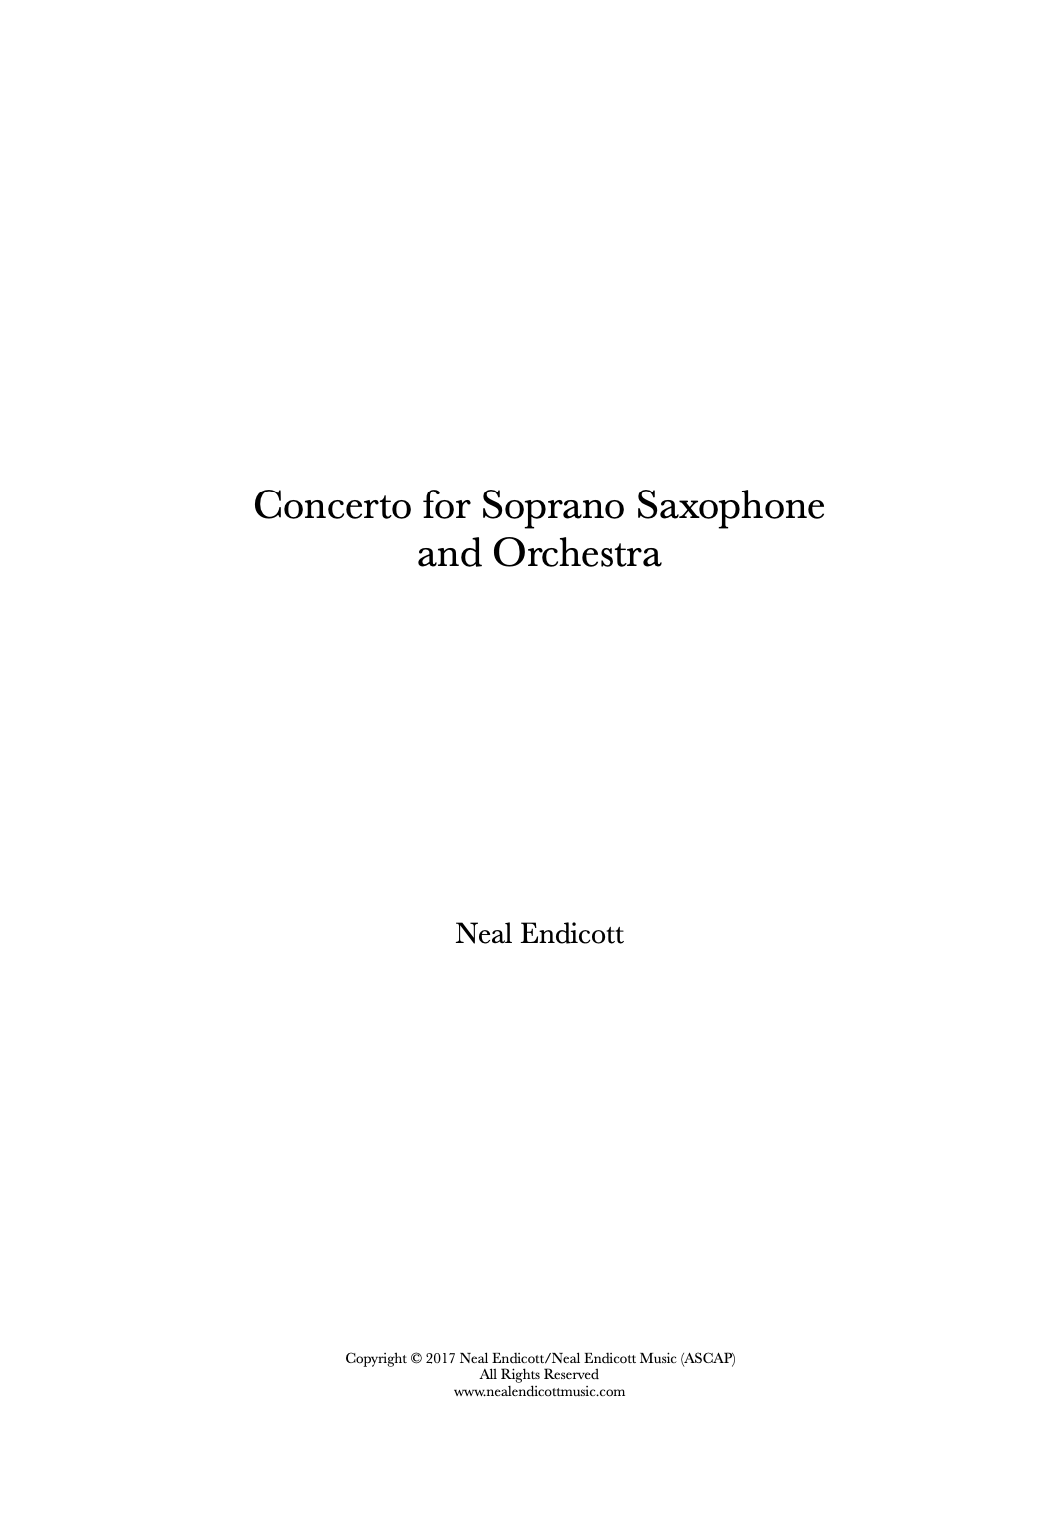 Concerto For Soprano Saxophone And Orchestra (Score Only) by Neal Endicott